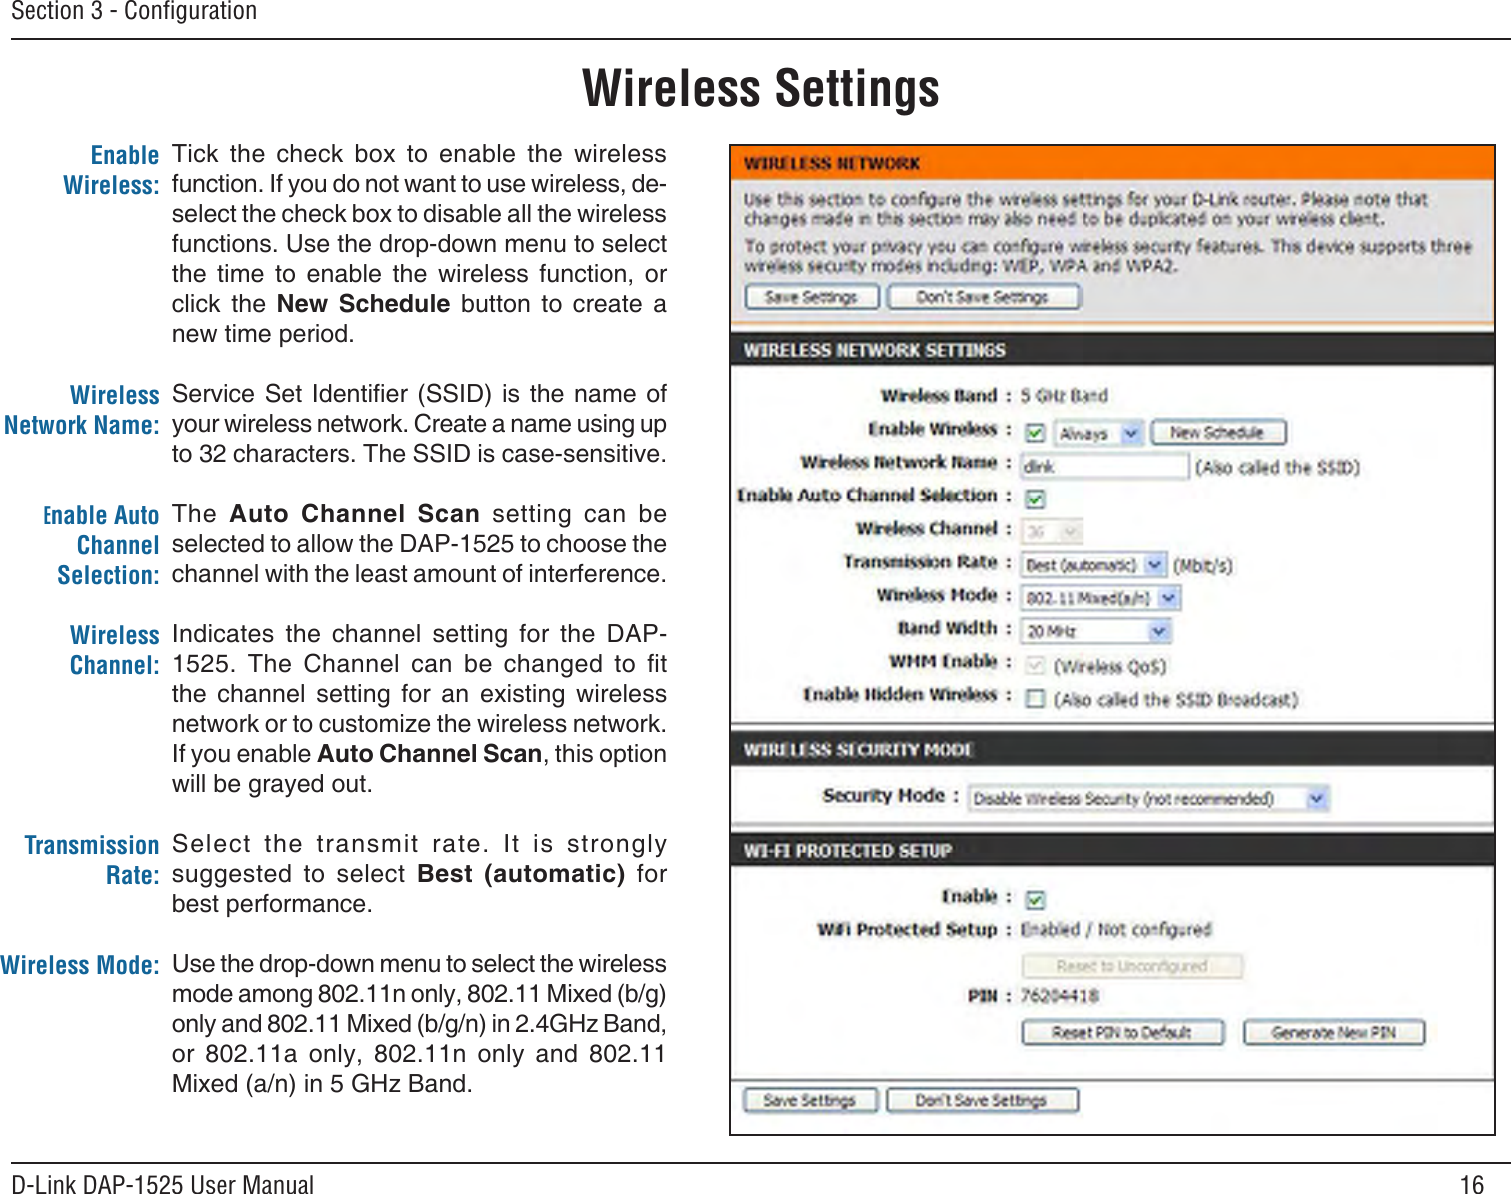 16D-Link DAP-1525 User ManualSection 3 - ConﬁgurationWireless SettingsTick  the  check  box  to  enable  the  wireless function. If you do not want to use wireless, de-select the check box to disable all the wireless functions. Use the drop-down menu to select the  time  to  enable  the  wireless  function,  or click  the  New  Schedule  button  to  create  a  new time period.Service Set Identier (SSID)  is  the name of your wireless network. Create a name using up to 32 characters. The SSID is case-sensitive.The  Auto  Channel  Scan  setting  can  be selected to allow the DAP-1525 to choose the channel with the least amount of interference.Indicates  the  channel  setting  for  the  DAP-1525.  The  Channel  can  be  changed  to  t the  channel  setting  for  an  existing  wireless network or to customize the wireless network. If you enable Auto Channel Scan, this option will be grayed out.Select  the  transmit  rate.  It  is  strongly suggested  to  select  Best  (automatic)  for best performance.Use the drop-down menu to select the wireless mode among 802.11n only, 802.11 Mixed (b/g) only and 802.11 Mixed (b/g/n) in 2.4GHz Band, or  802.11a  only,  802.11n  only  and  802.11 Mixed (a/n) in 5 GHz Band.Enable Wireless:Wireless Network Name:Enable Auto Channel Selection:Wireless Channel:Transmission Rate:Wireless Mode: